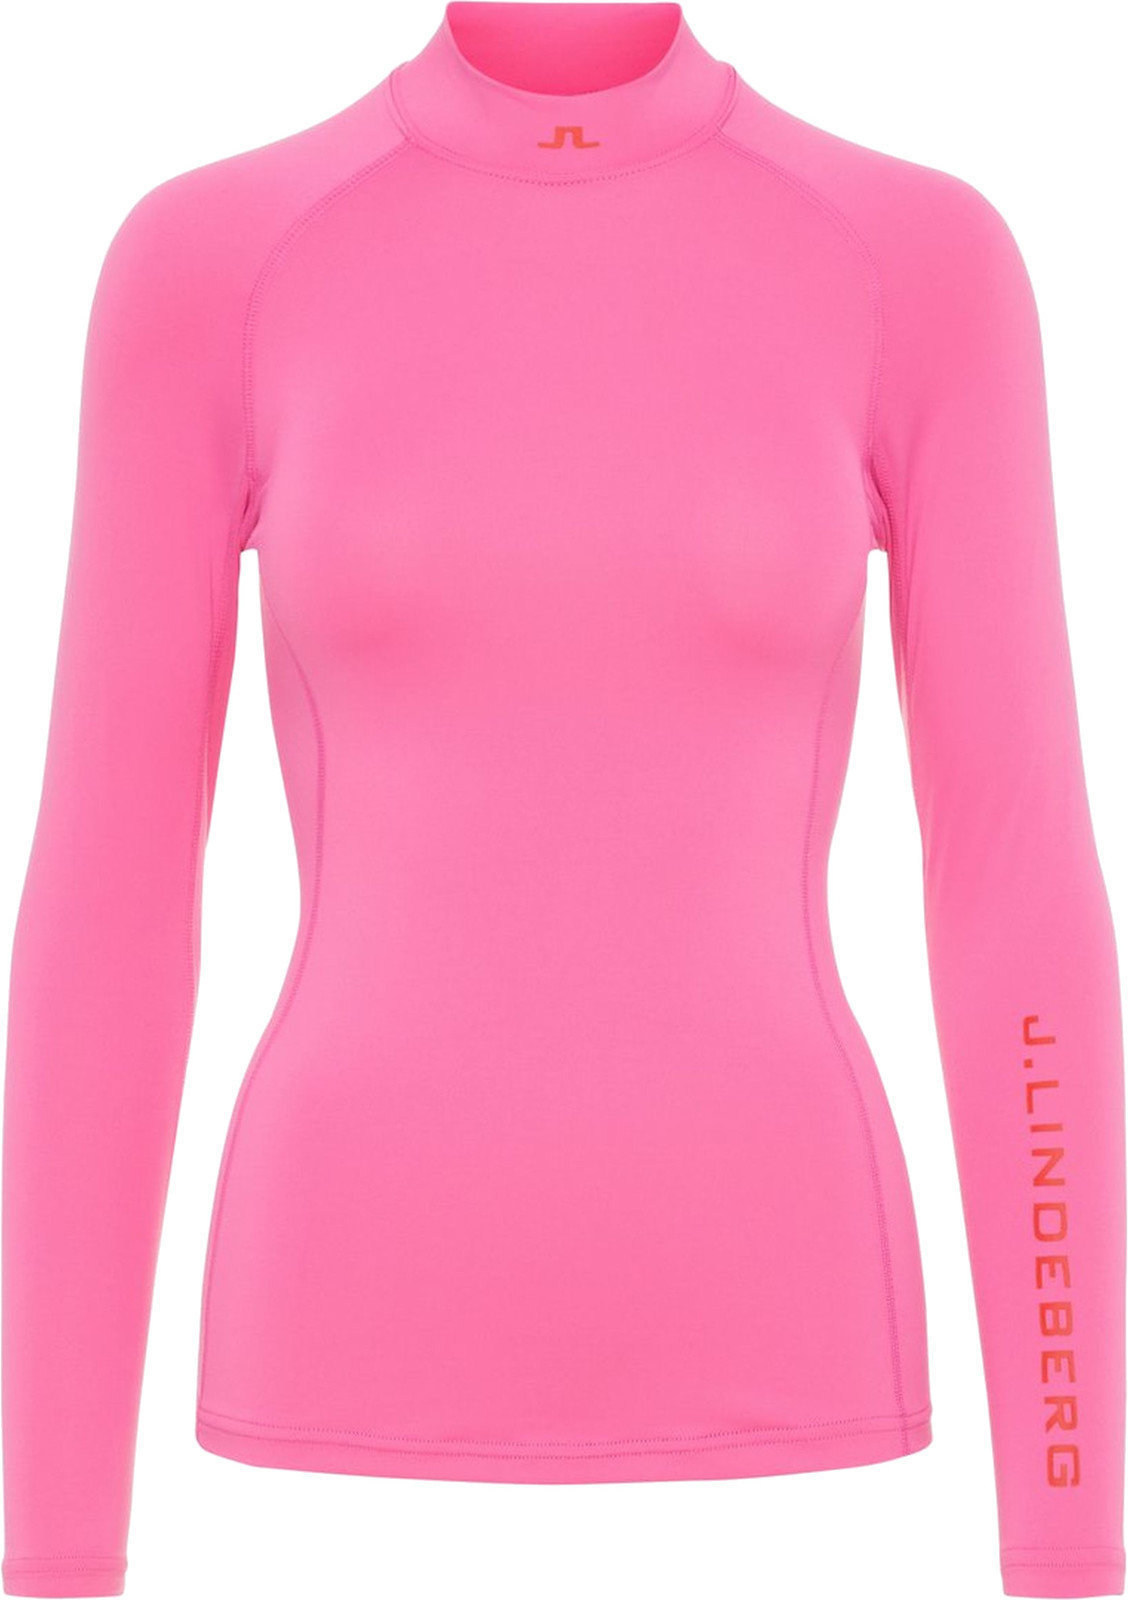 Thermo ondergoed J.Lindeberg Asa Soft Compression Womens Base Layer Pop Pink S